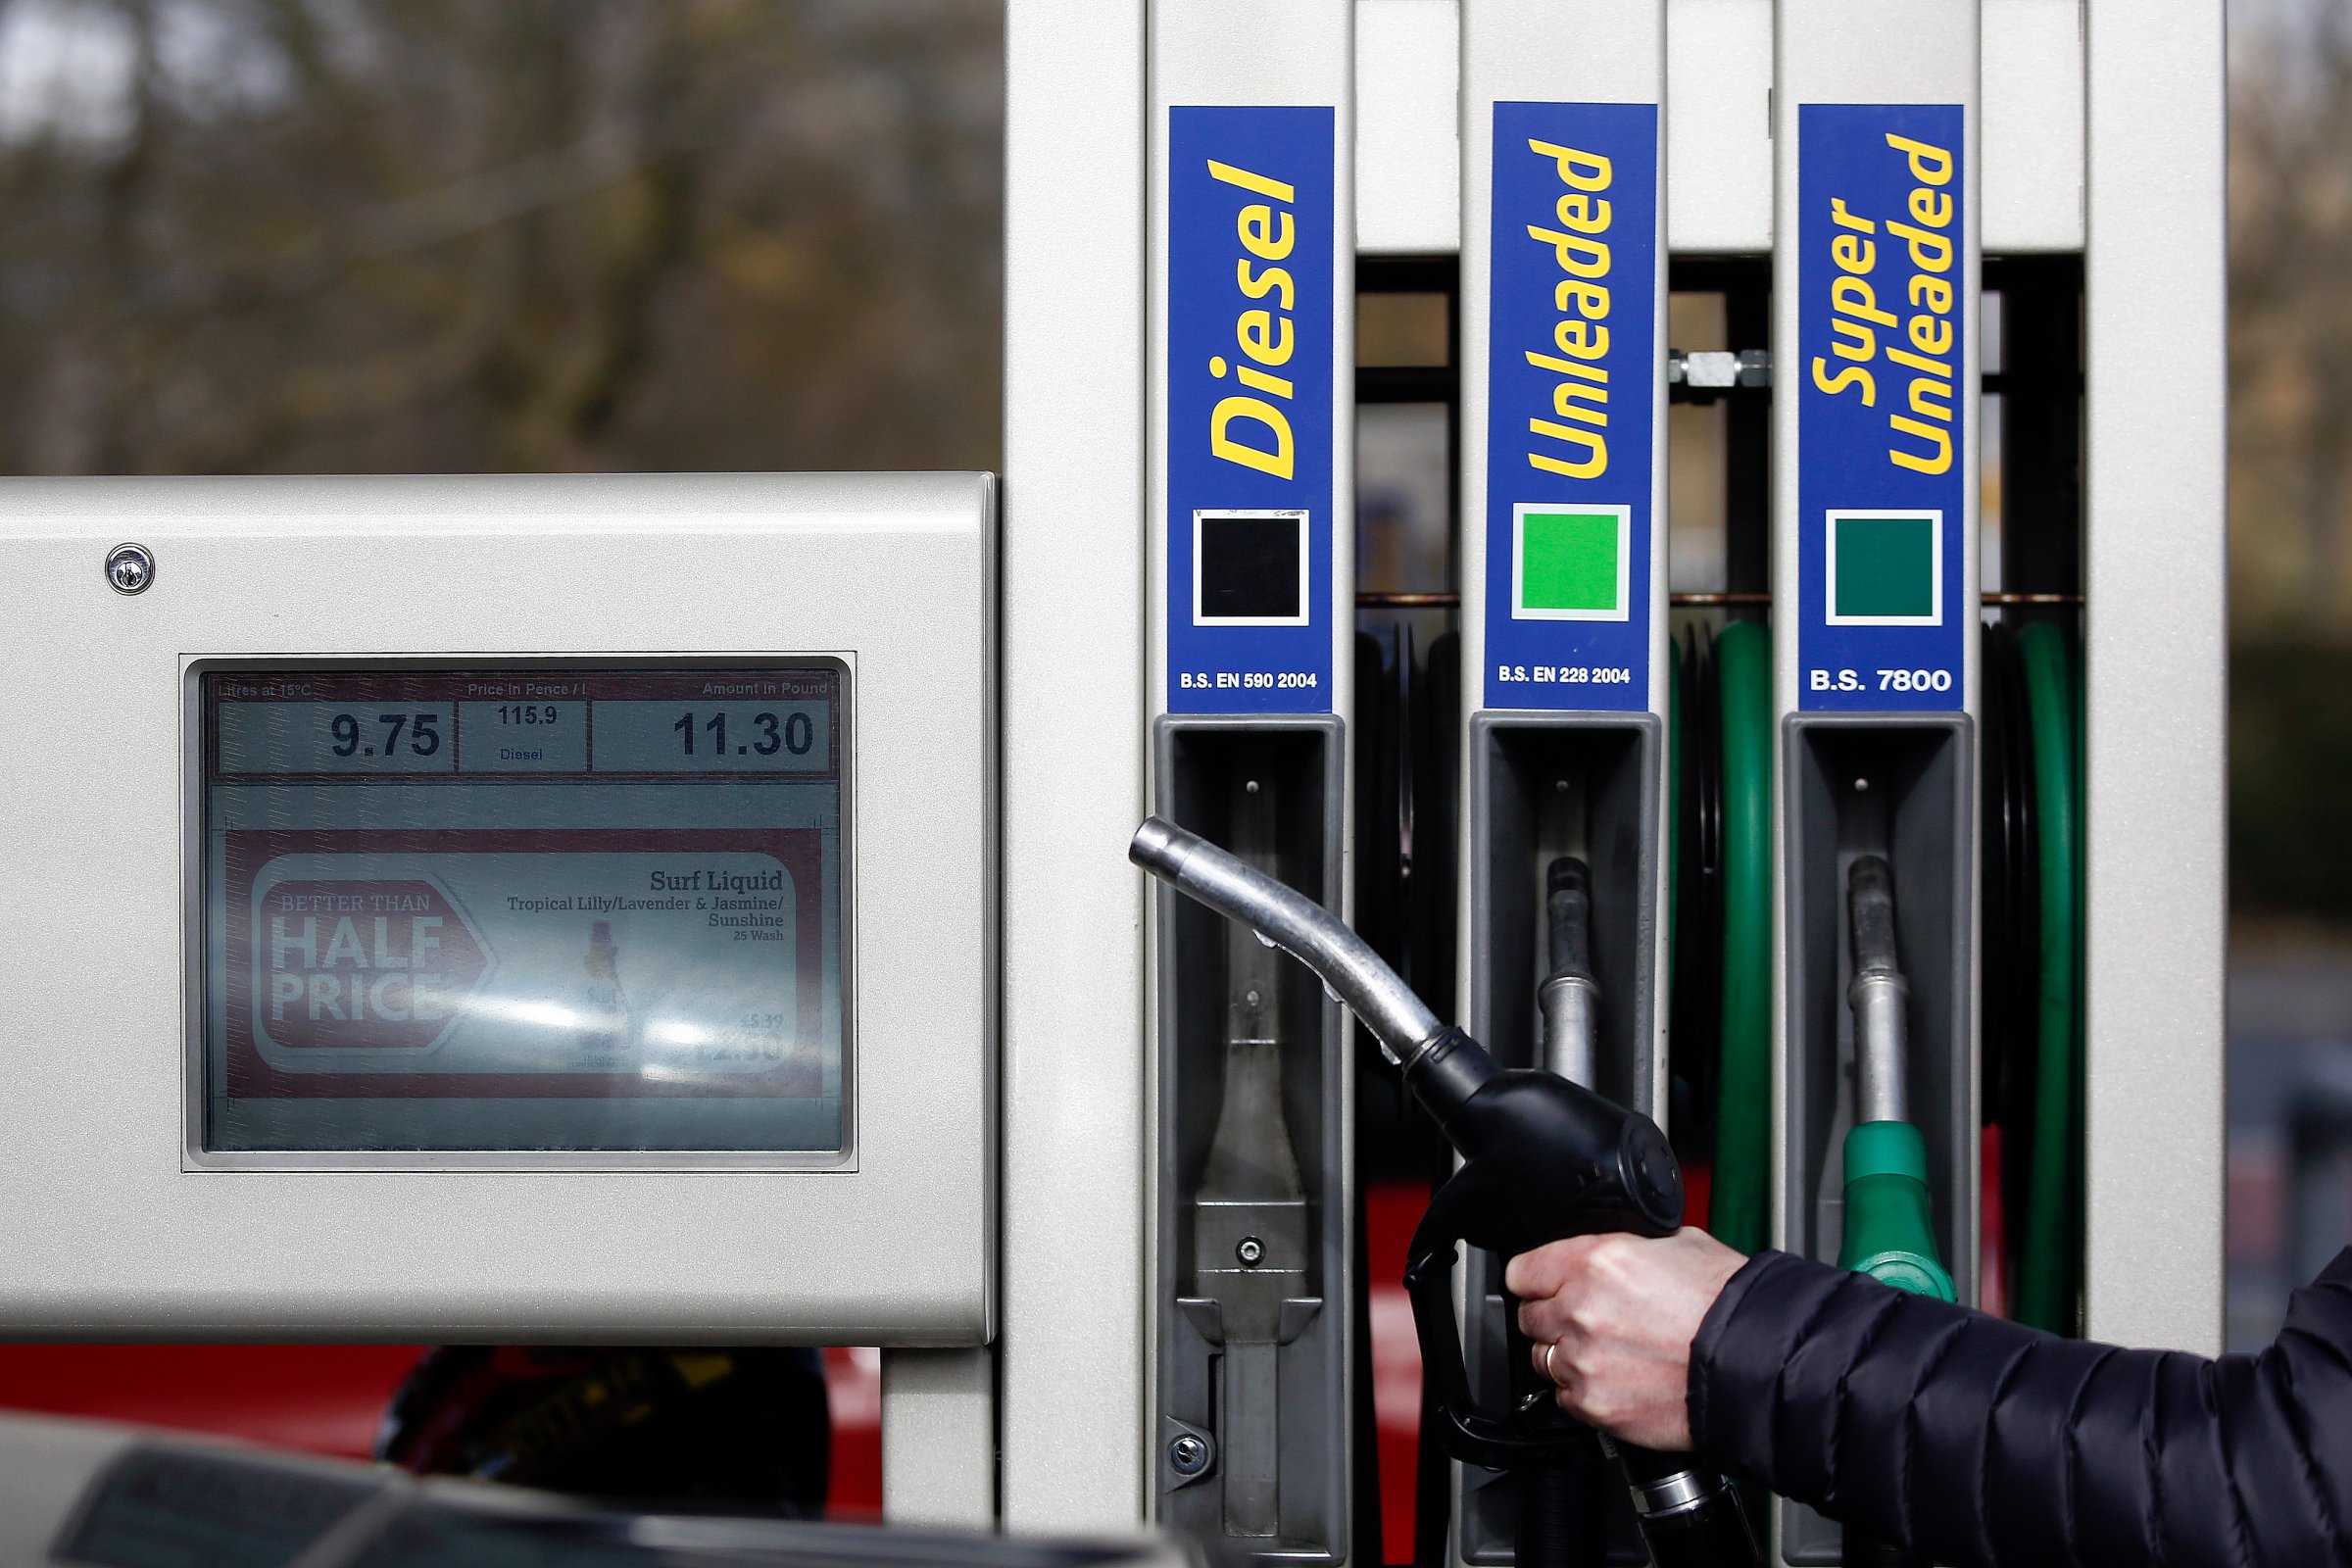 An employee holds a fuel nozzle as he prepares to refuel a diesel automobile on the forecourt of a JET petrol station, operated by Phillips 66, in Portsmouth, U.K., on March 6, 2015.